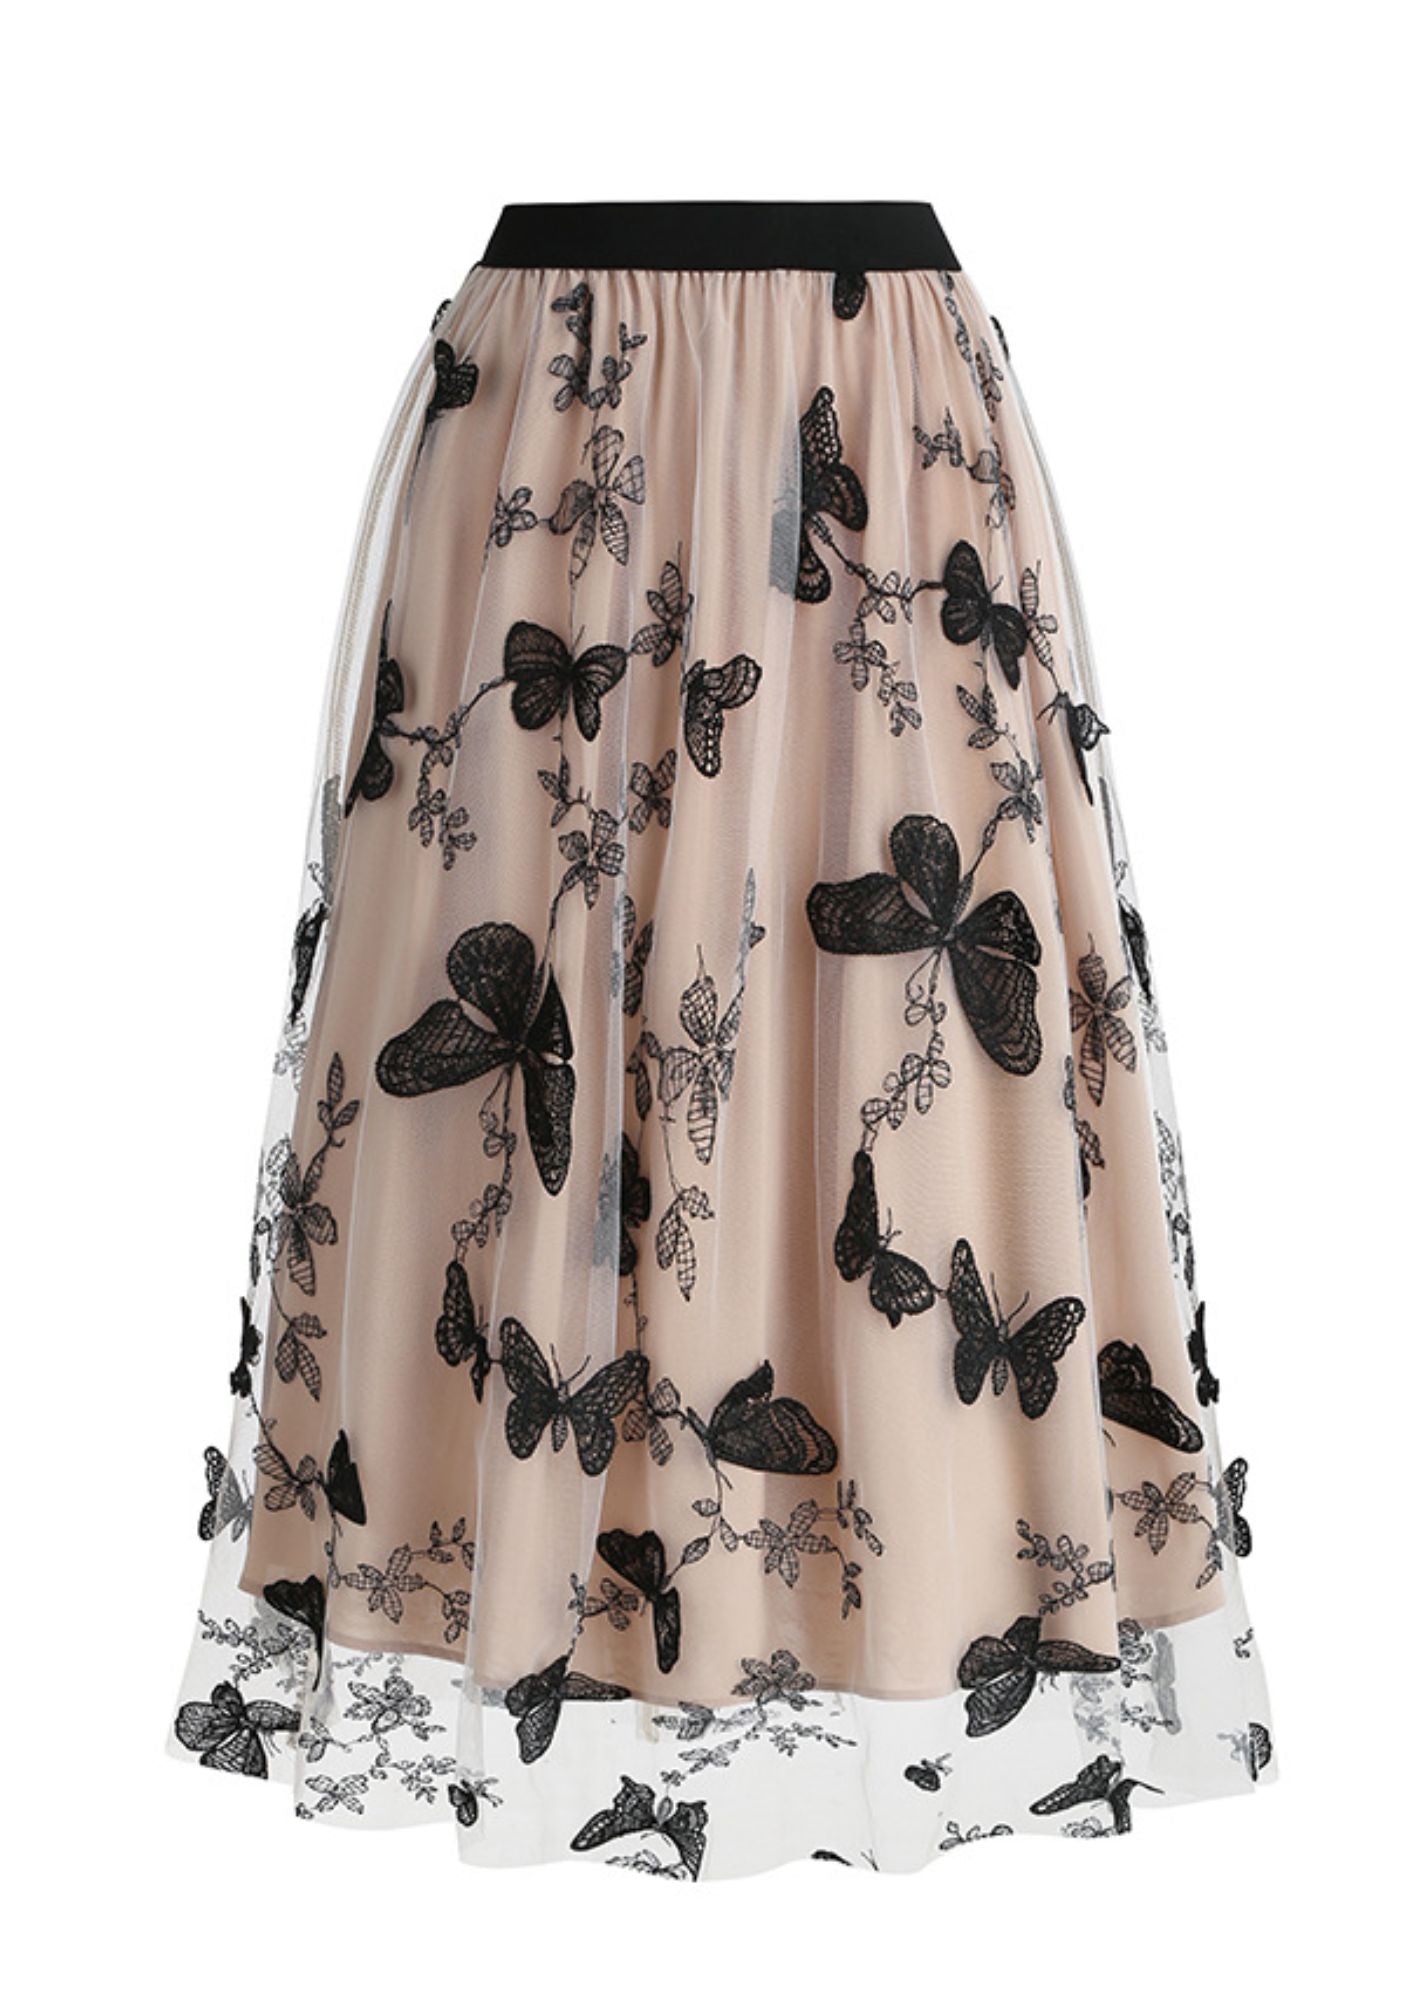 Women's Embroidered Mesh Butterfly Skirt